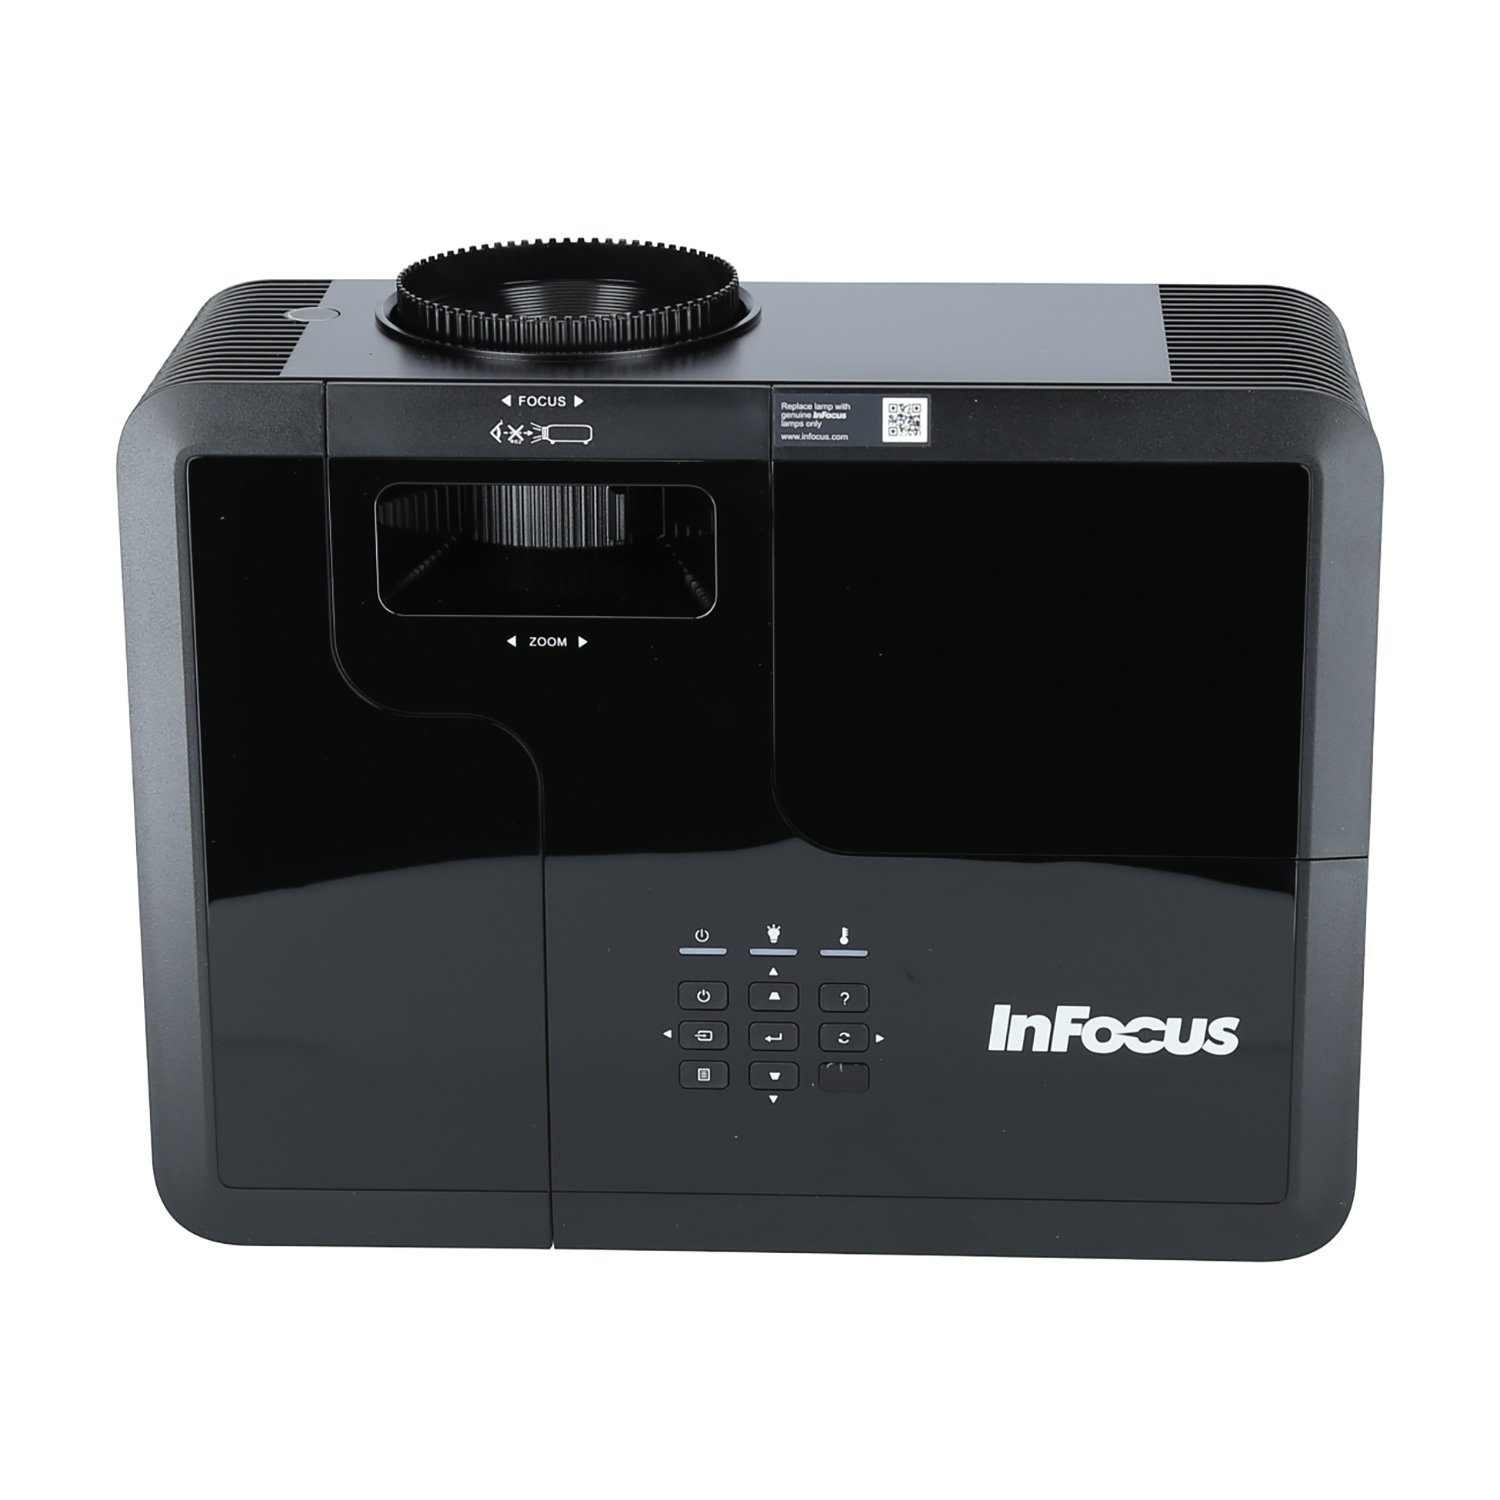 Infocus 1280 px) 28500:1, 800 x lm, IN2136 (4500 Beamer